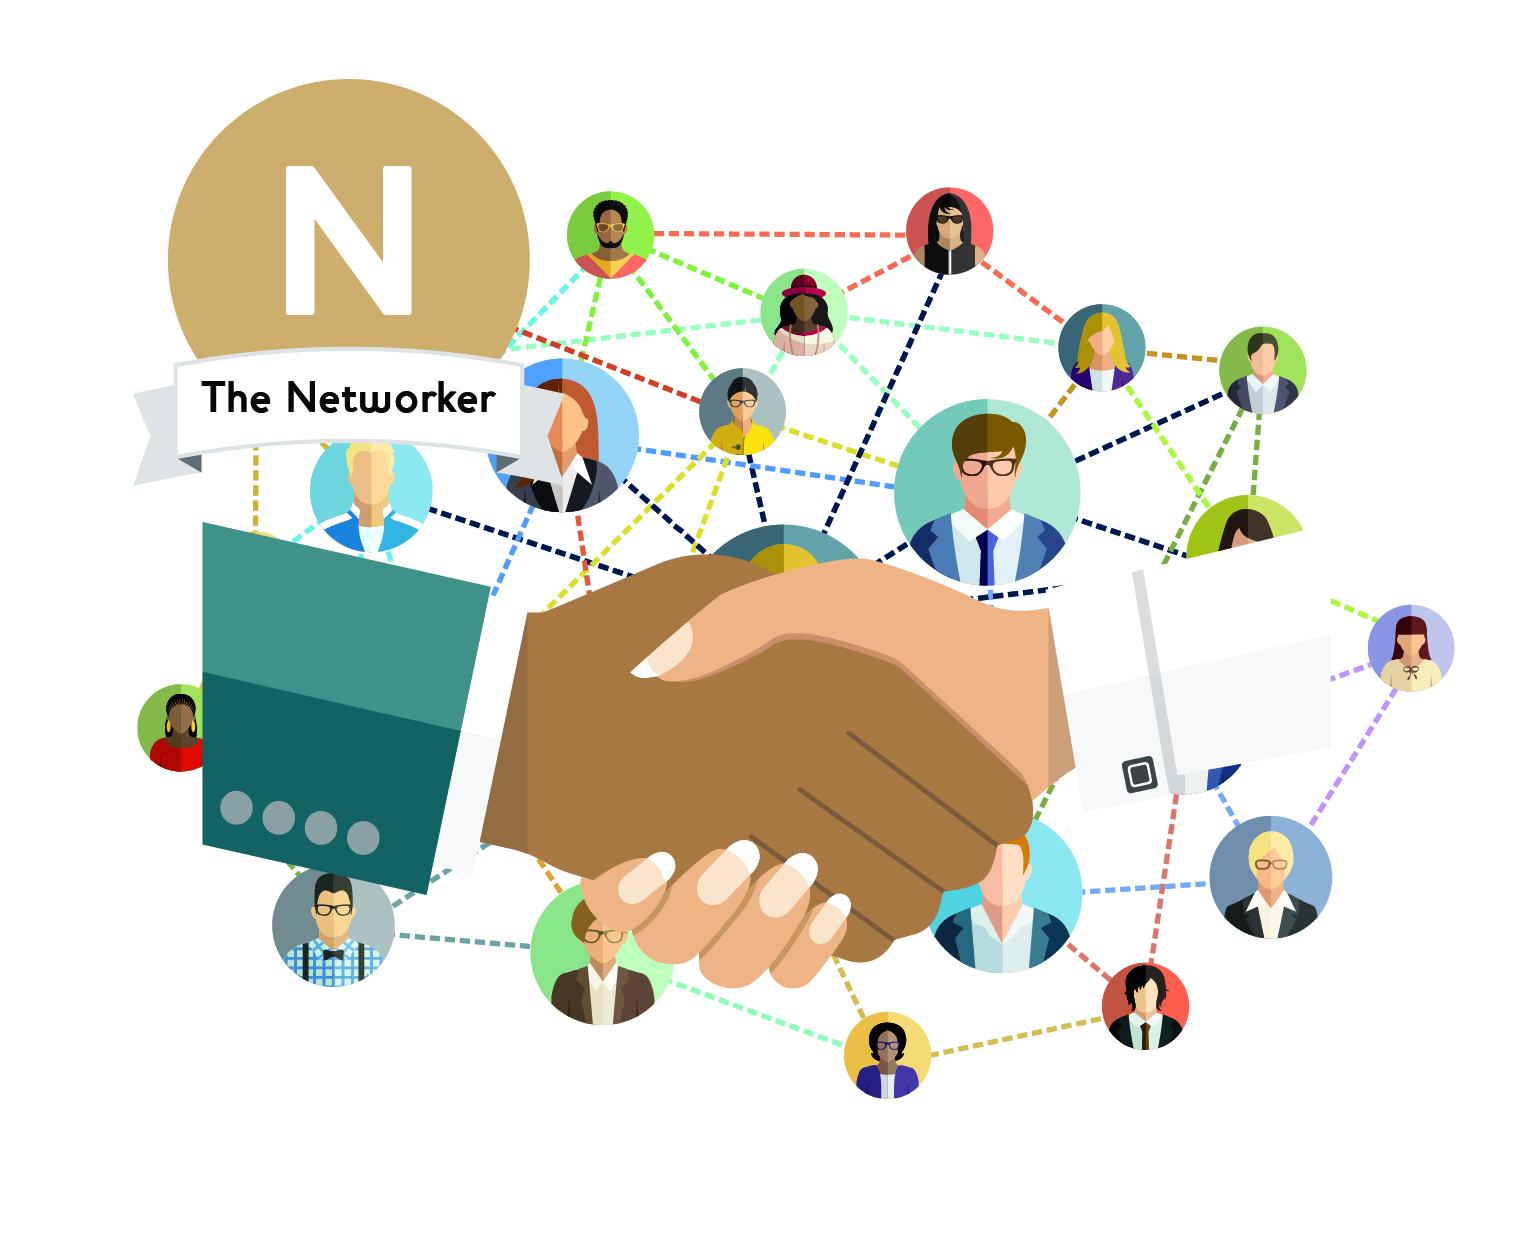 shaking hands in front of networked icons: are you a natural networker?